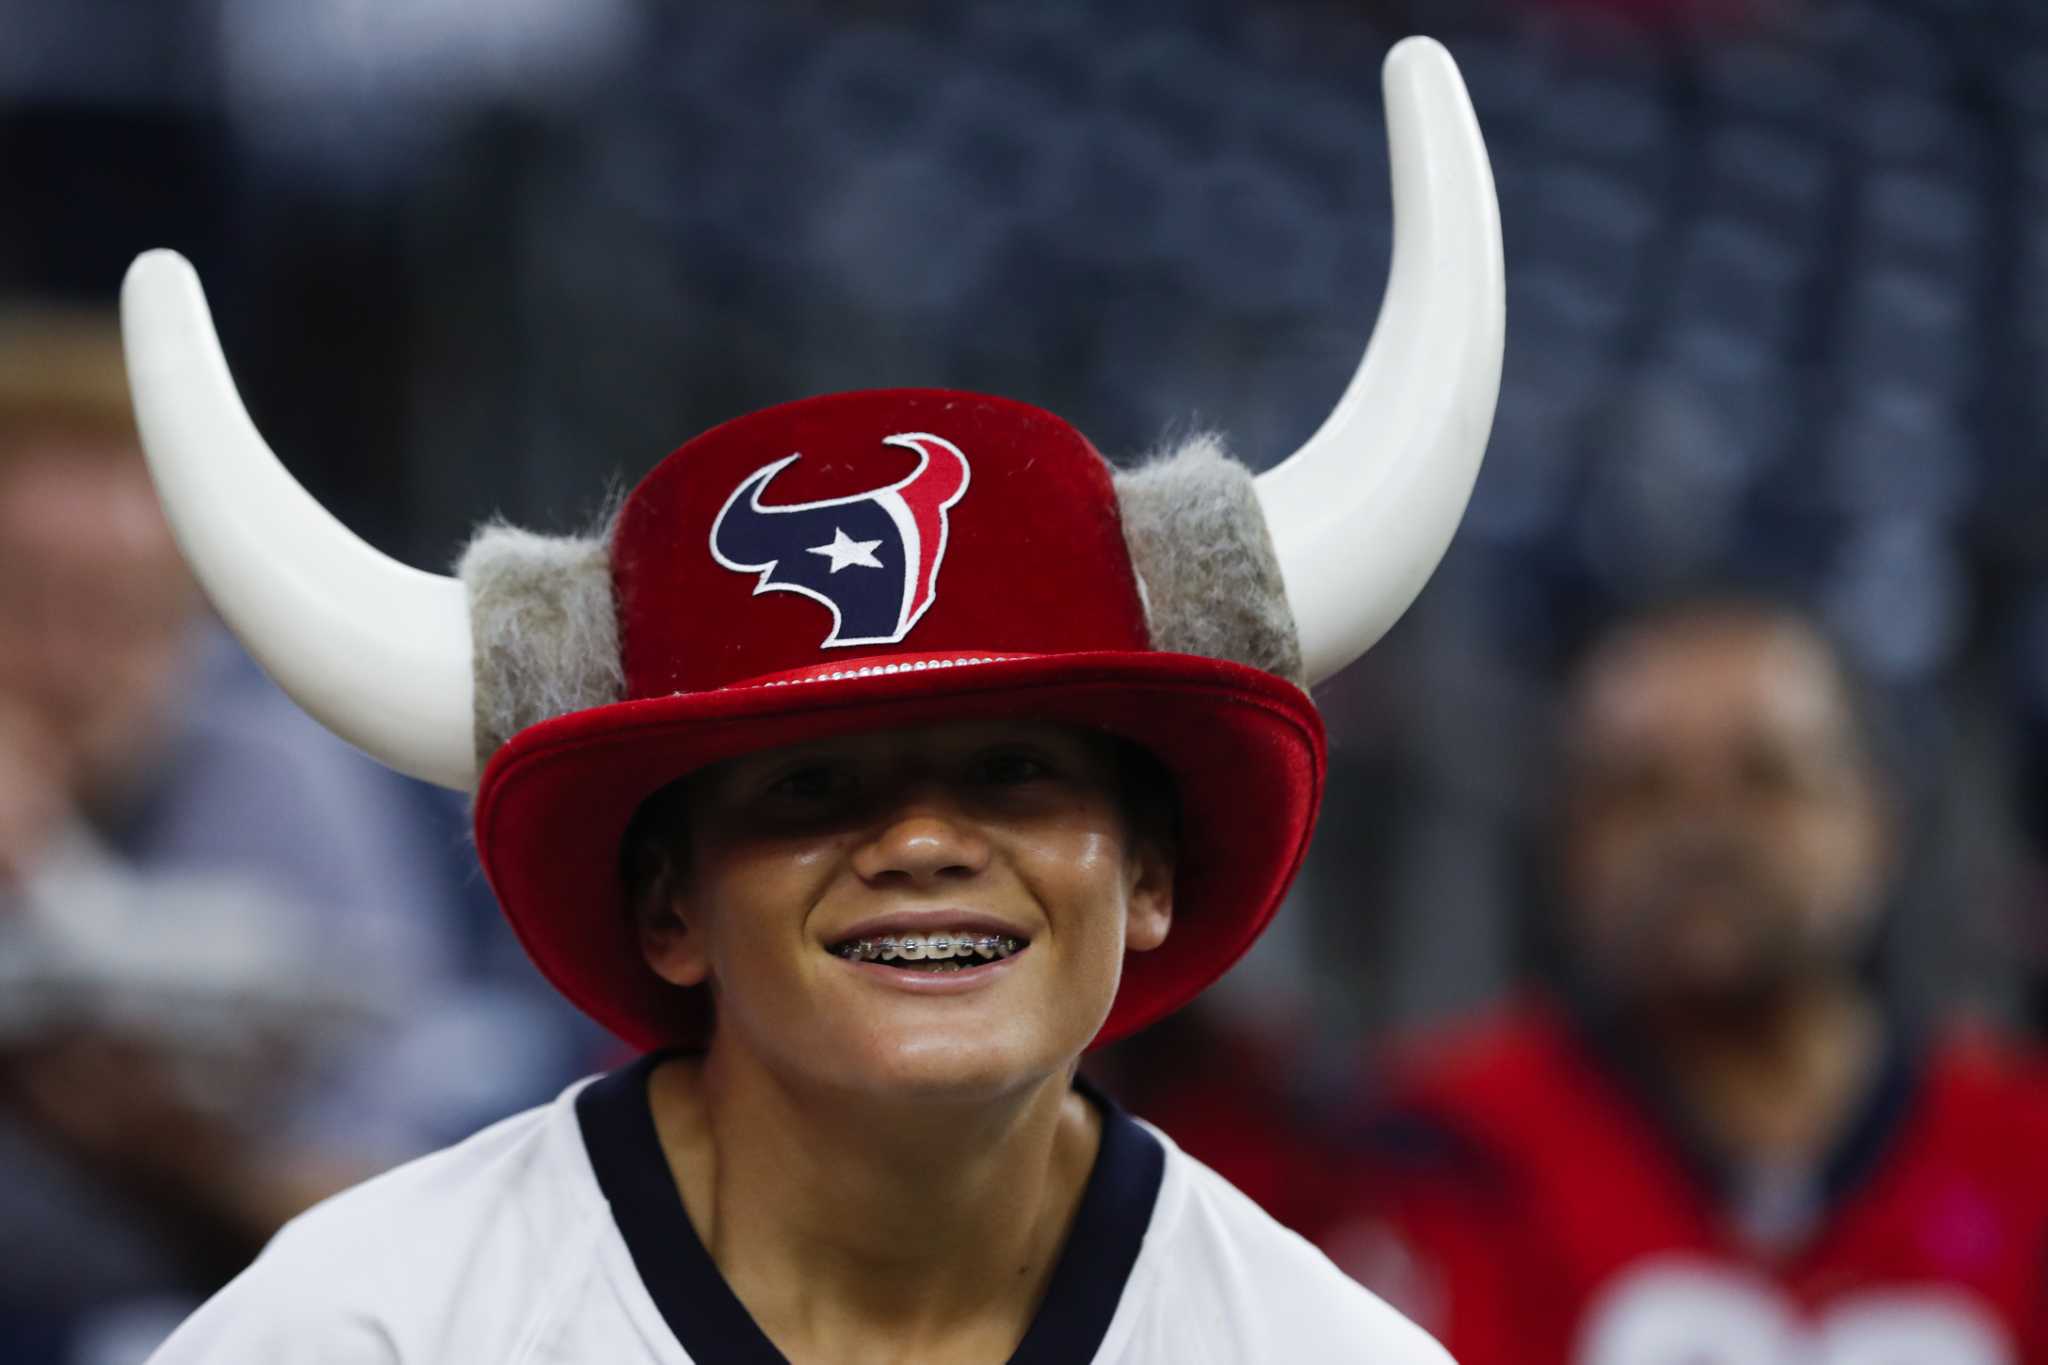 Texans, Cowboys fans party together at NRG Stadium tailgate